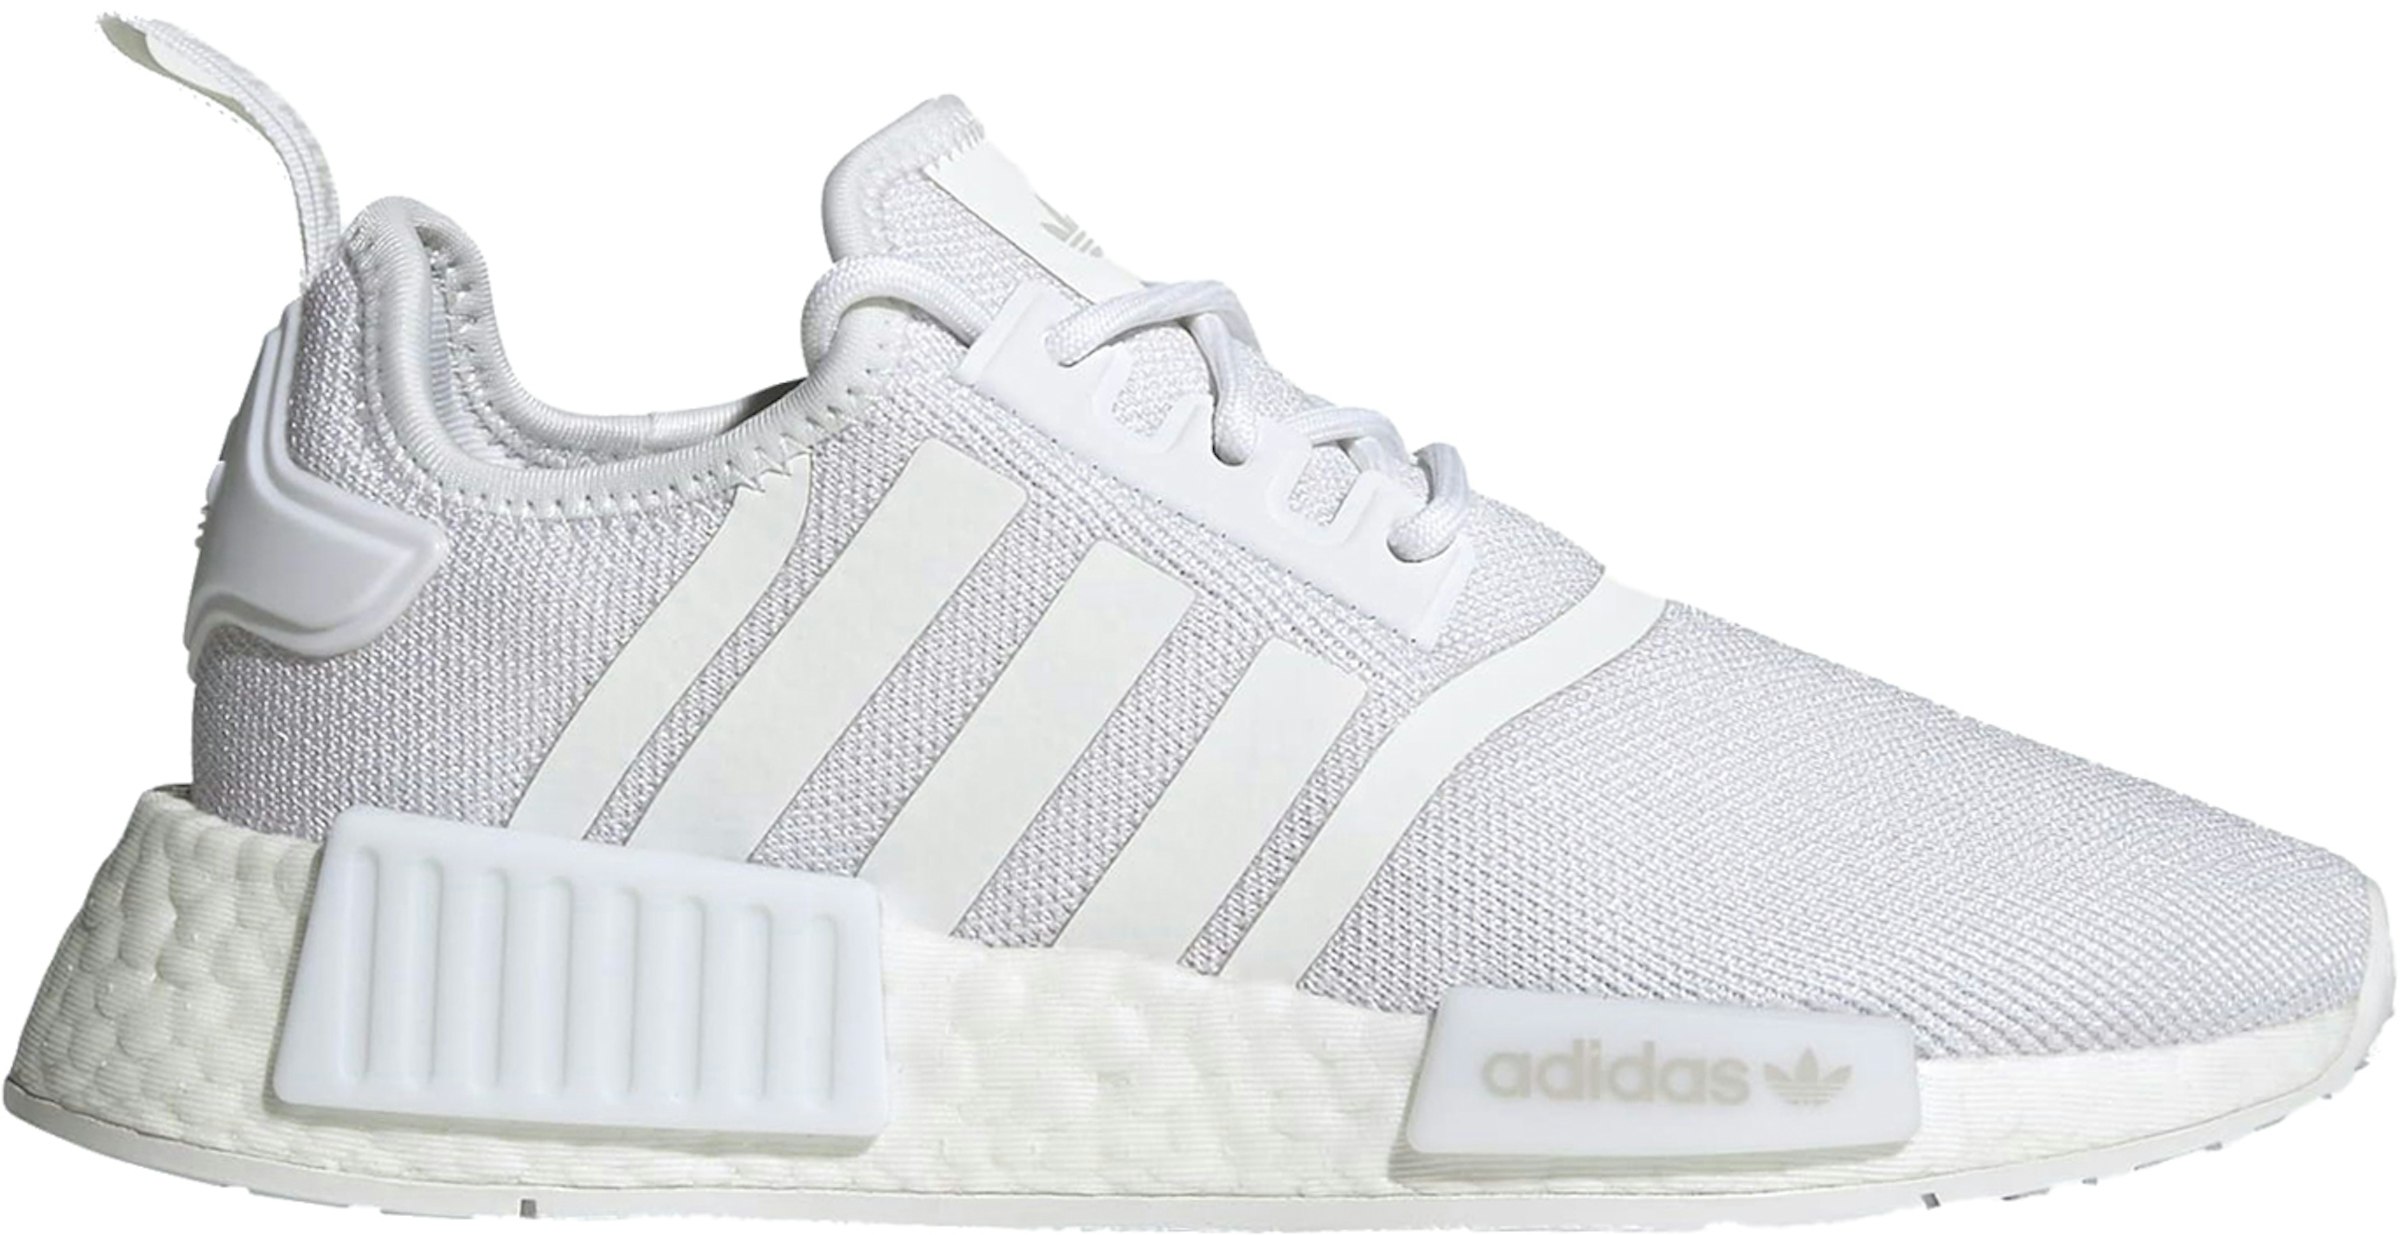 adidas NMD R1 Refined Cloud White Grey One Kids' - - US